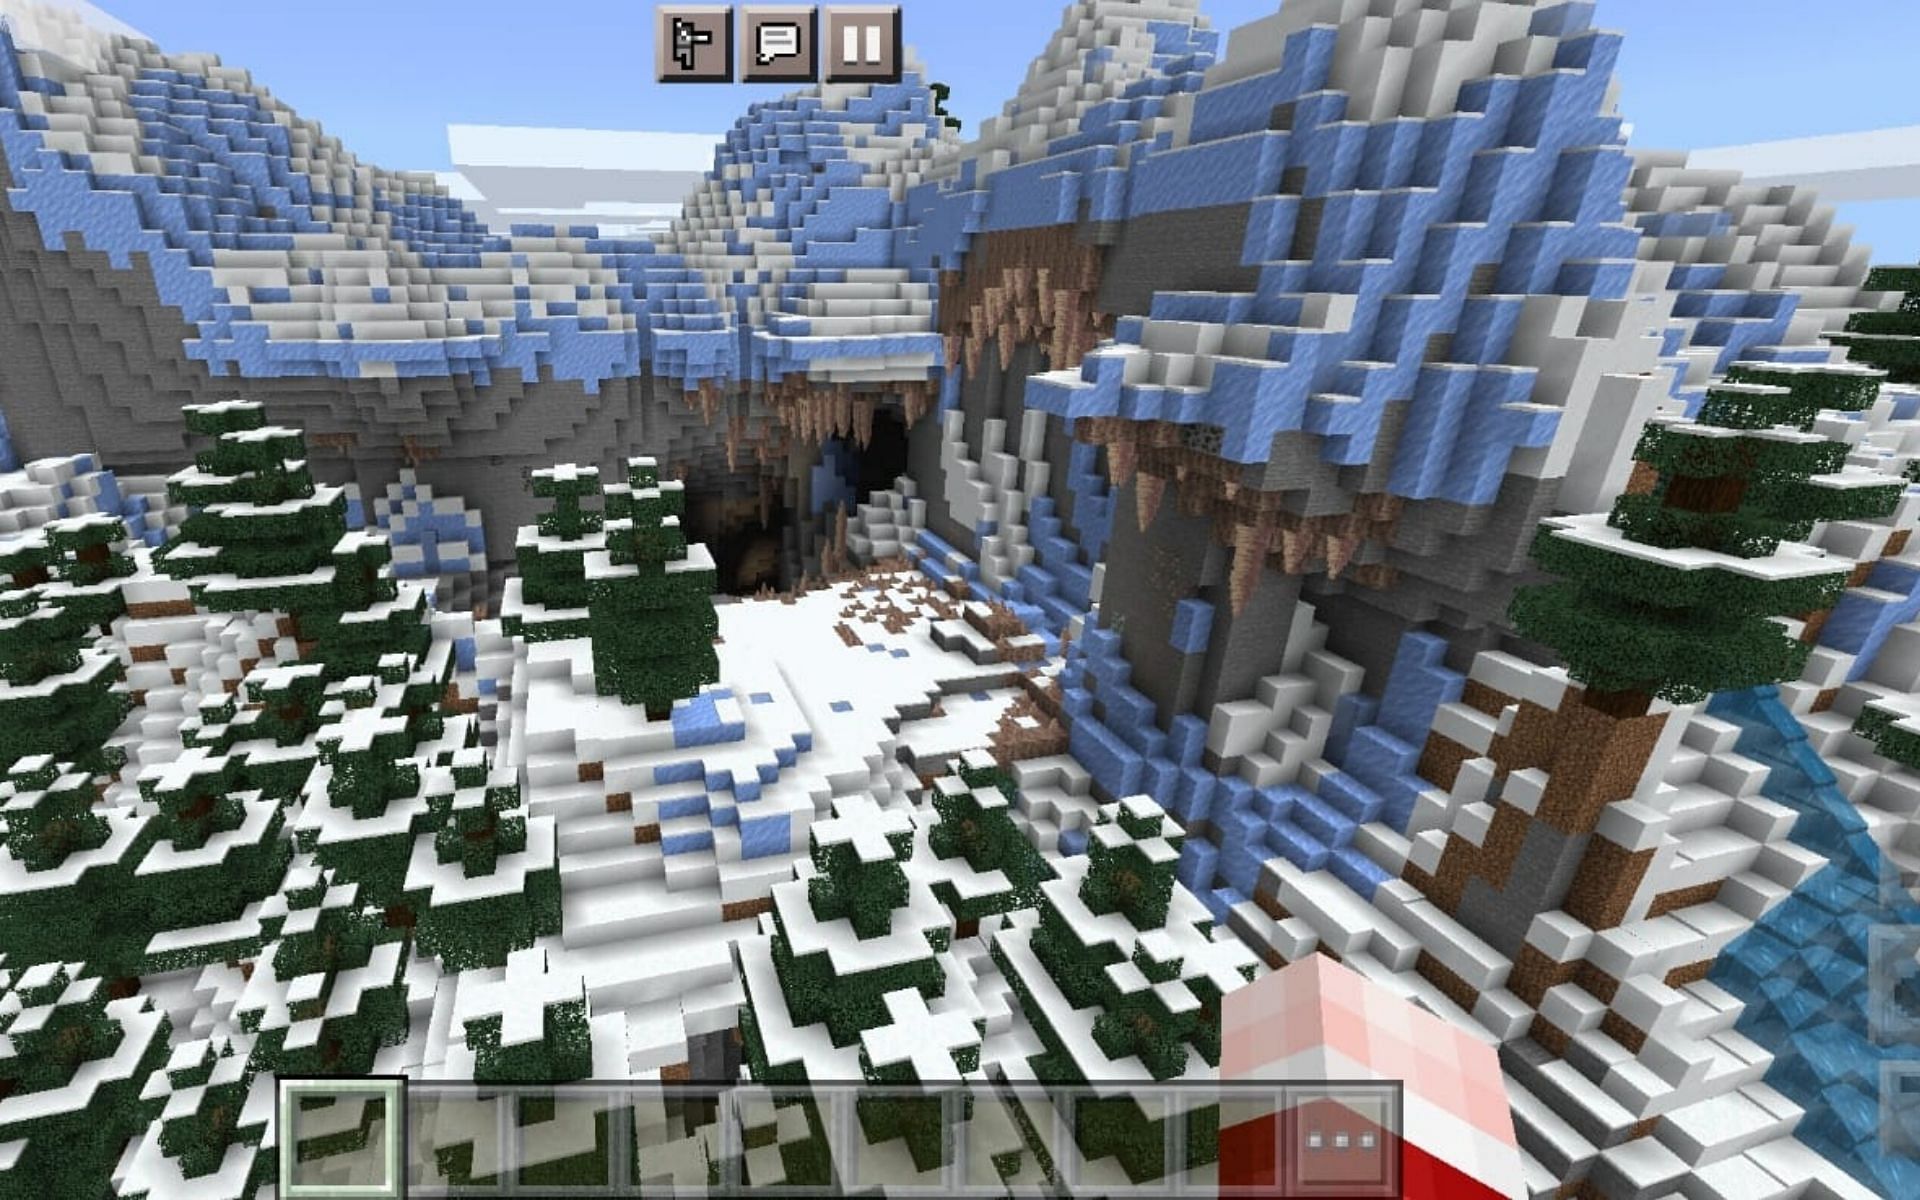 Dripstone cave exposed and surrounded by frozen peaks (Image via Minecraft)